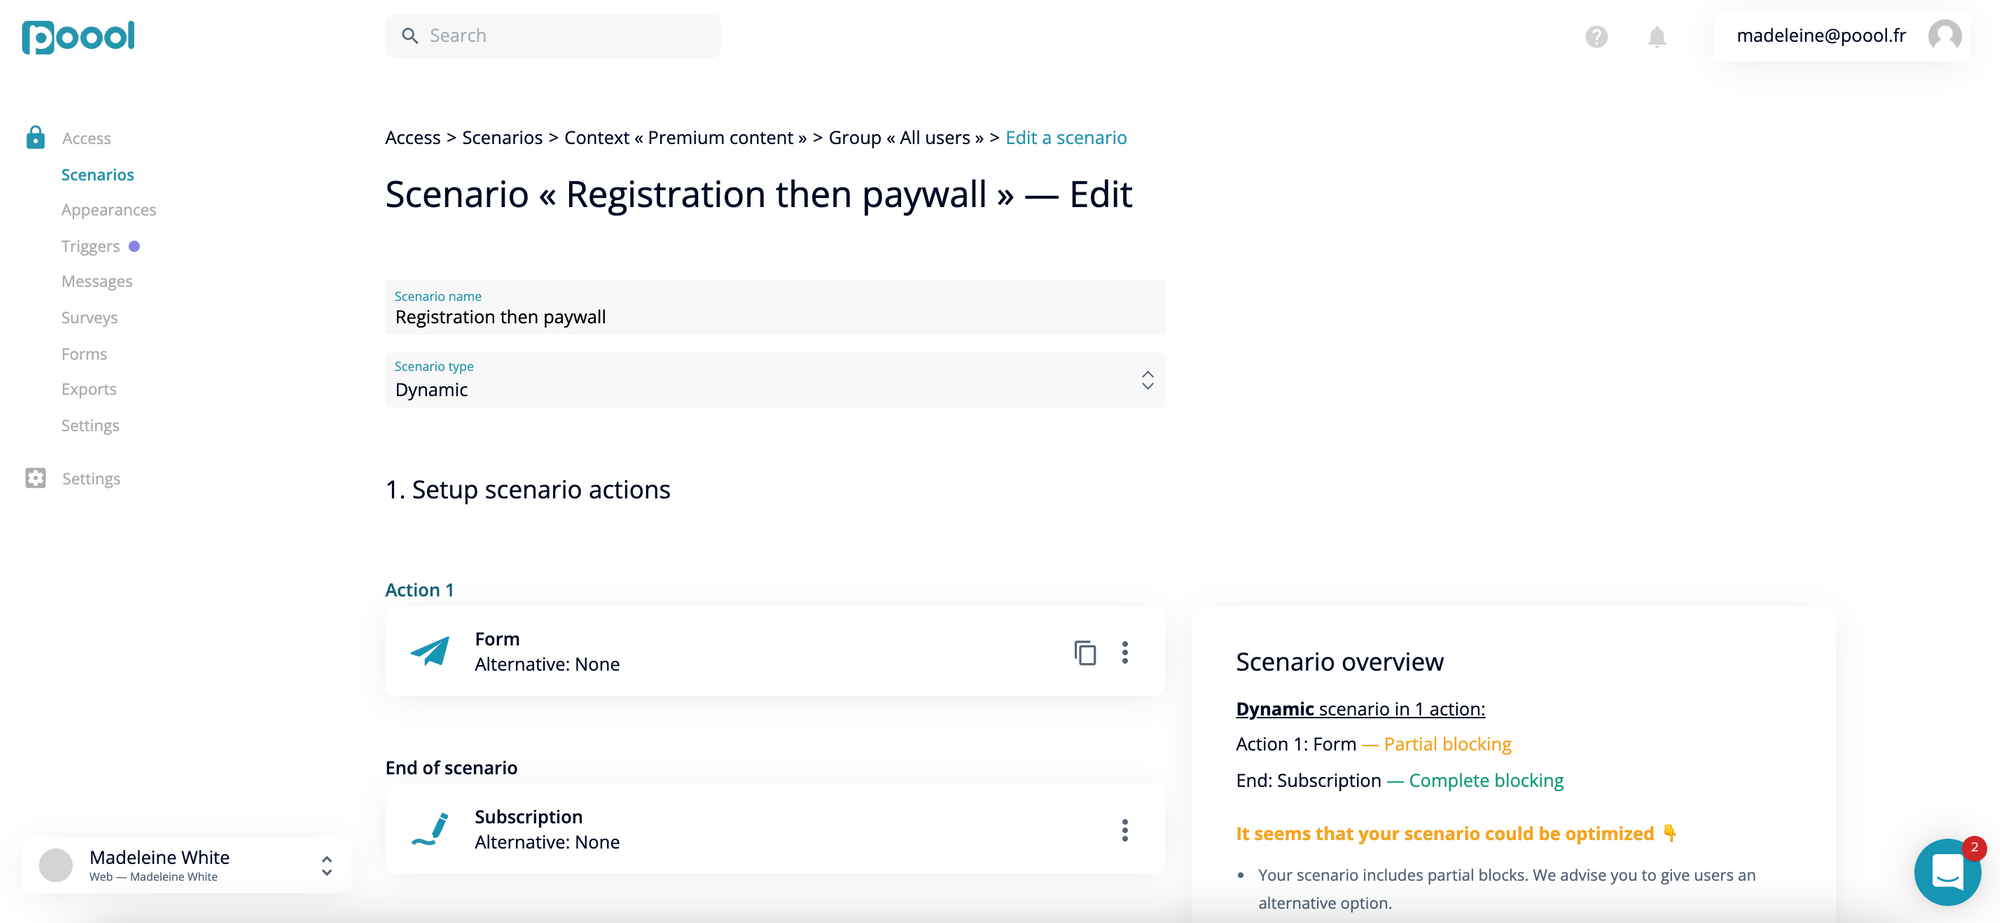 Paywalls for Brands